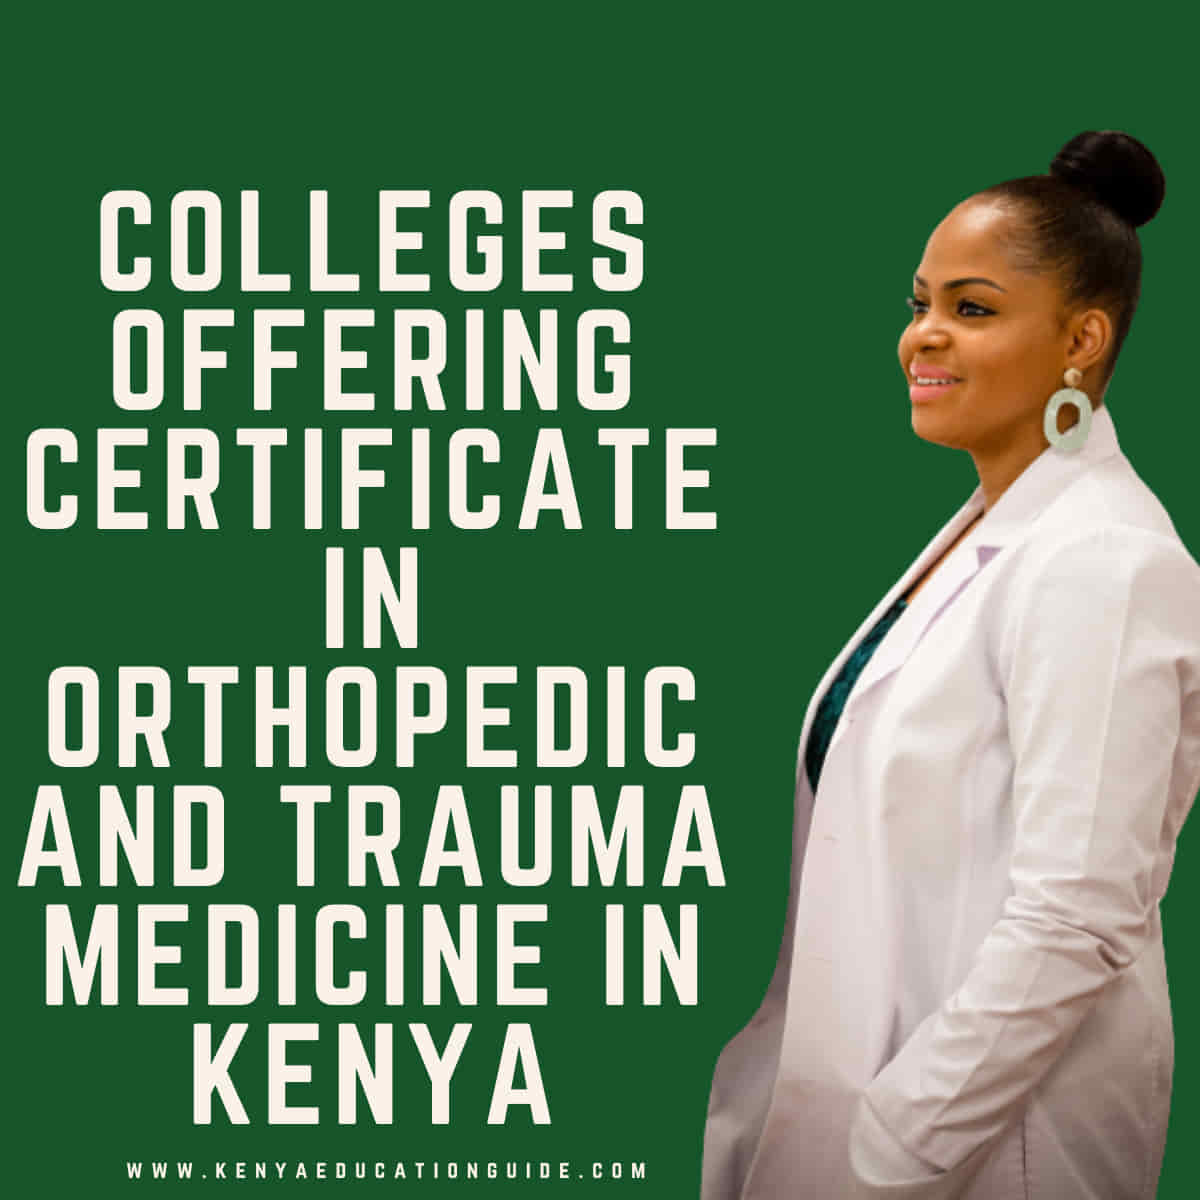 Colleges offering certificate in orthopedic and trauma medicine